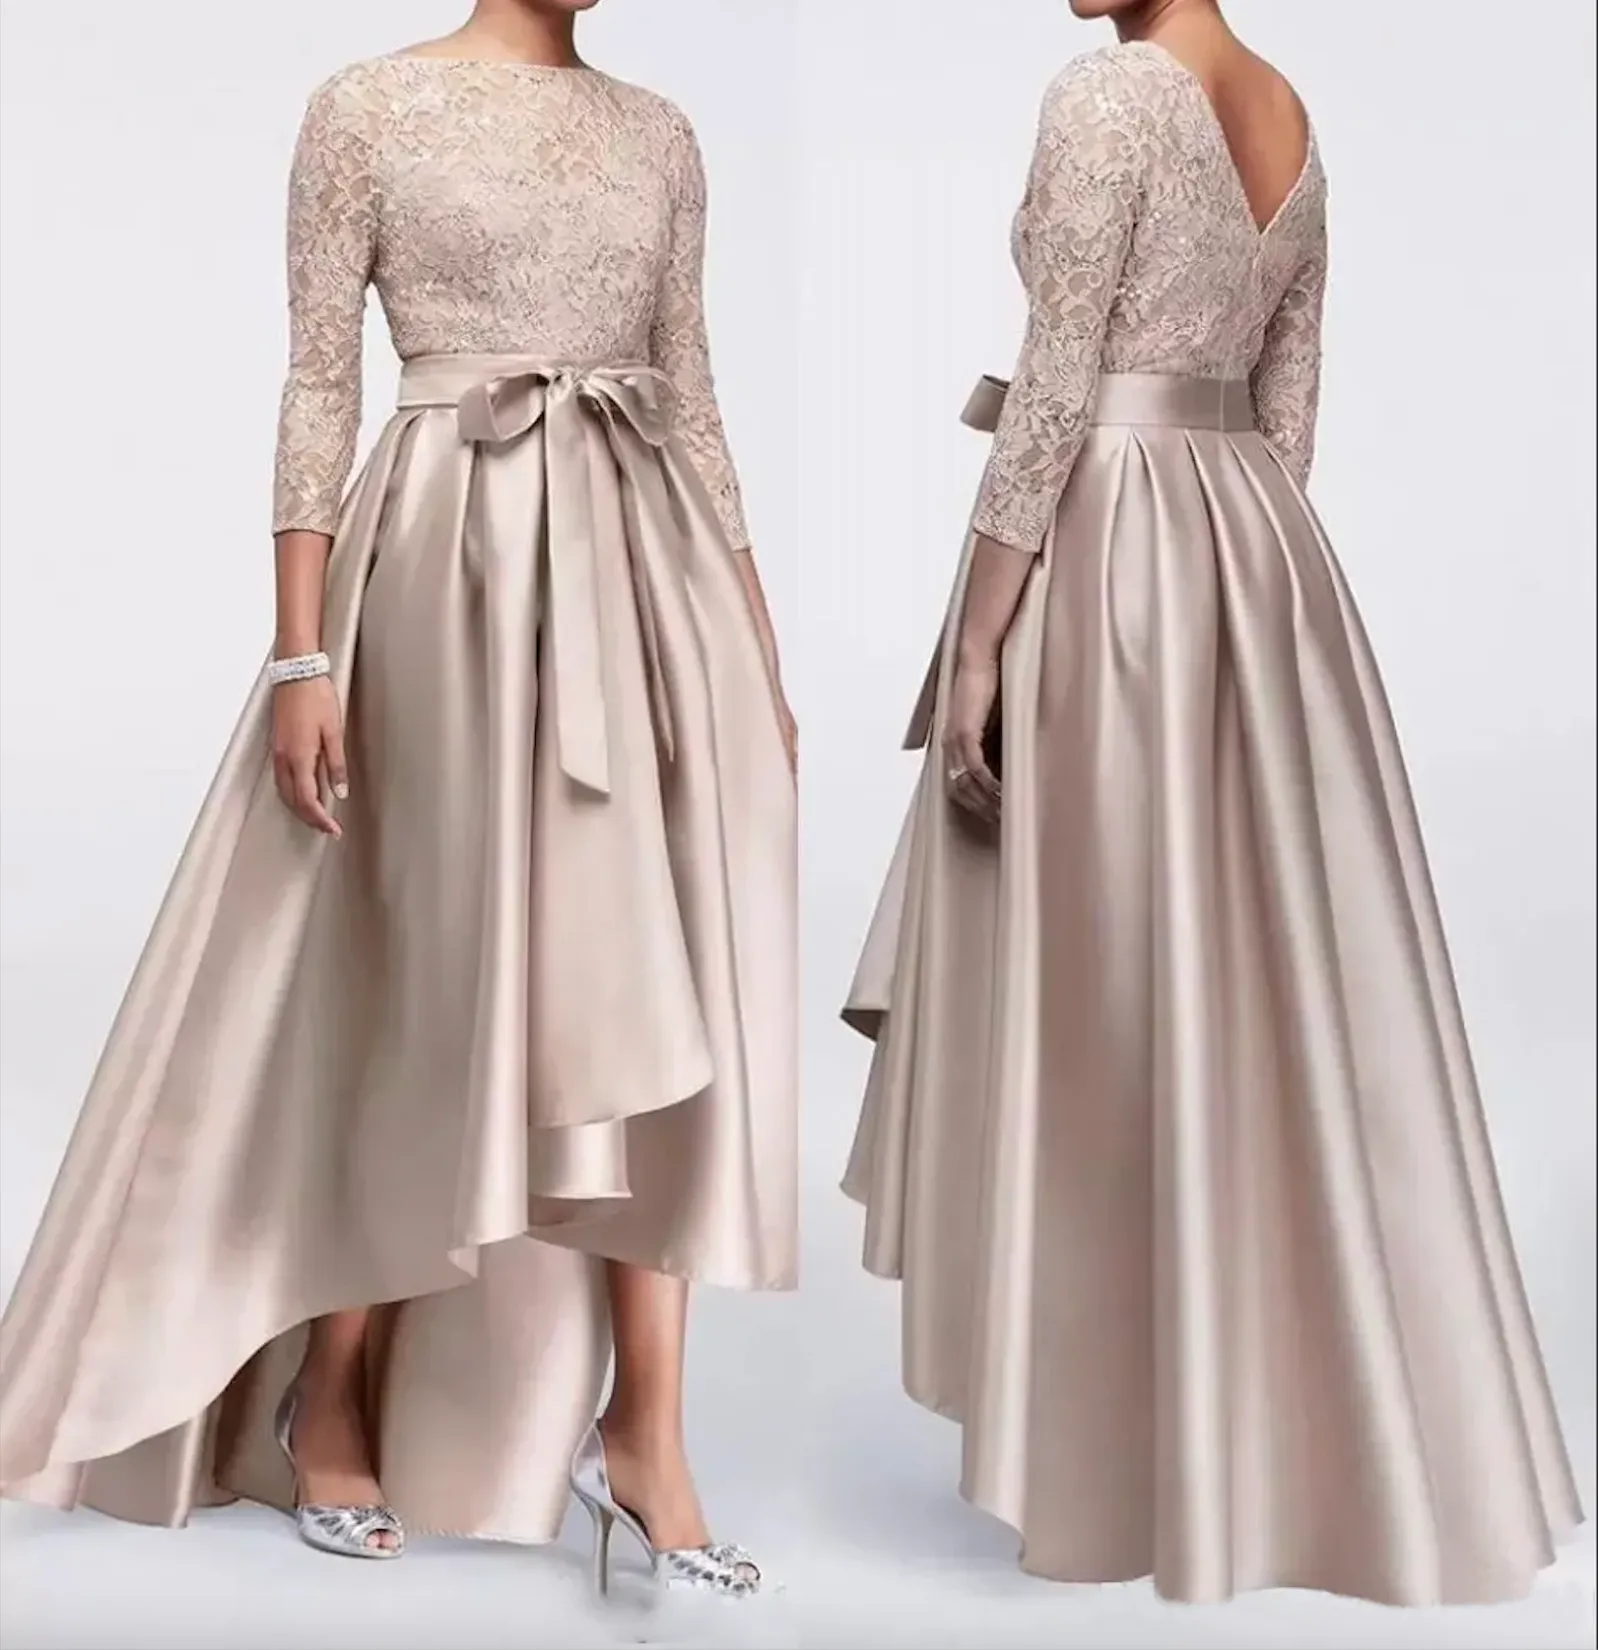 Plus Champagne Lace Size the Bride Dresses Long Sleeves Satin High Low Sashes Mother of Groom Gowns Mor